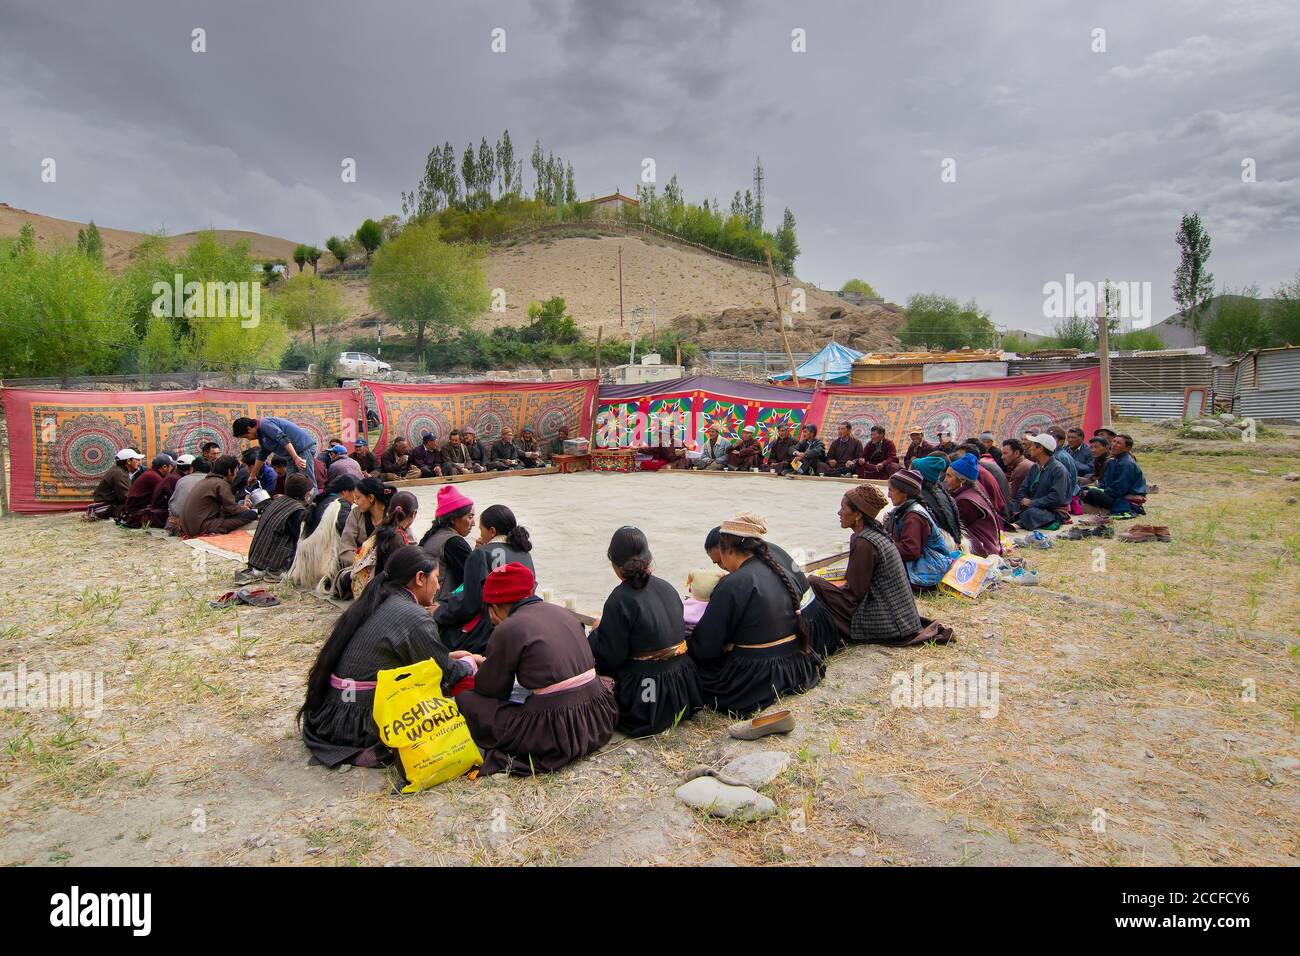 Mulbekh, Ladakh, India - 2nd September 2014 : Ladakhi people in traditional dresses, gathered for religious festival. Himalayan mountains backdrop. Stock Photo